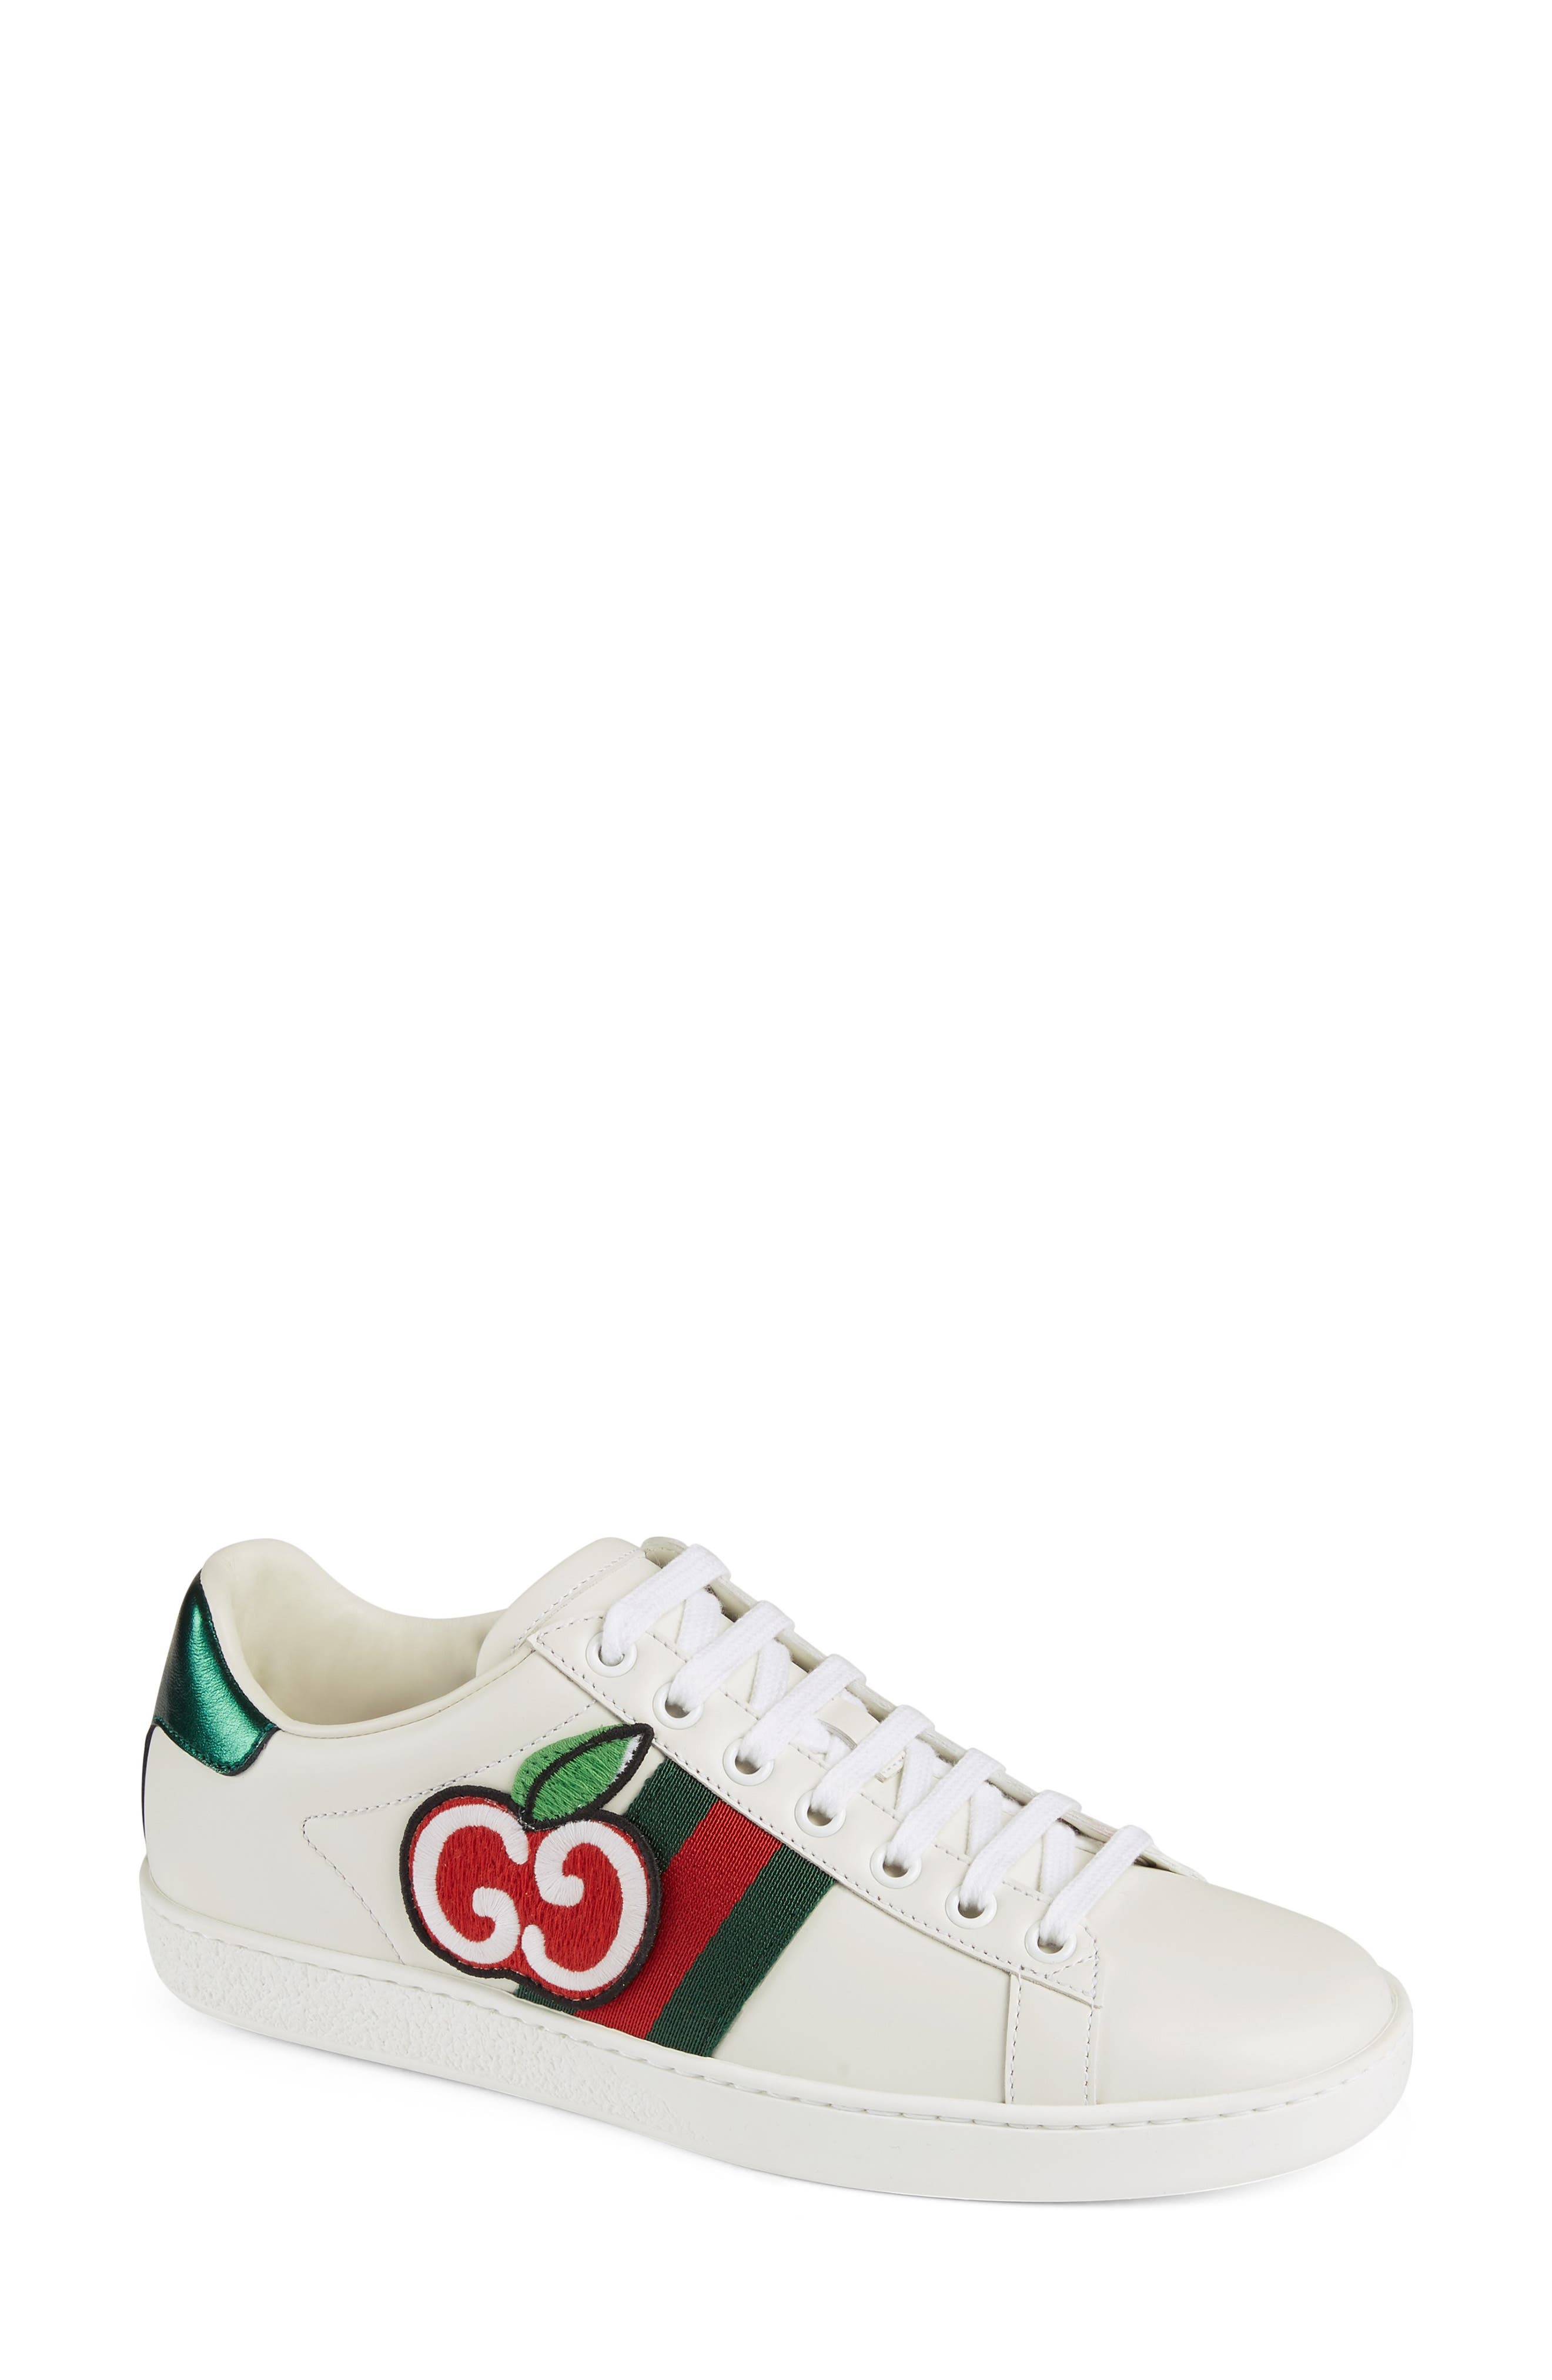 gucci shoes g's all over